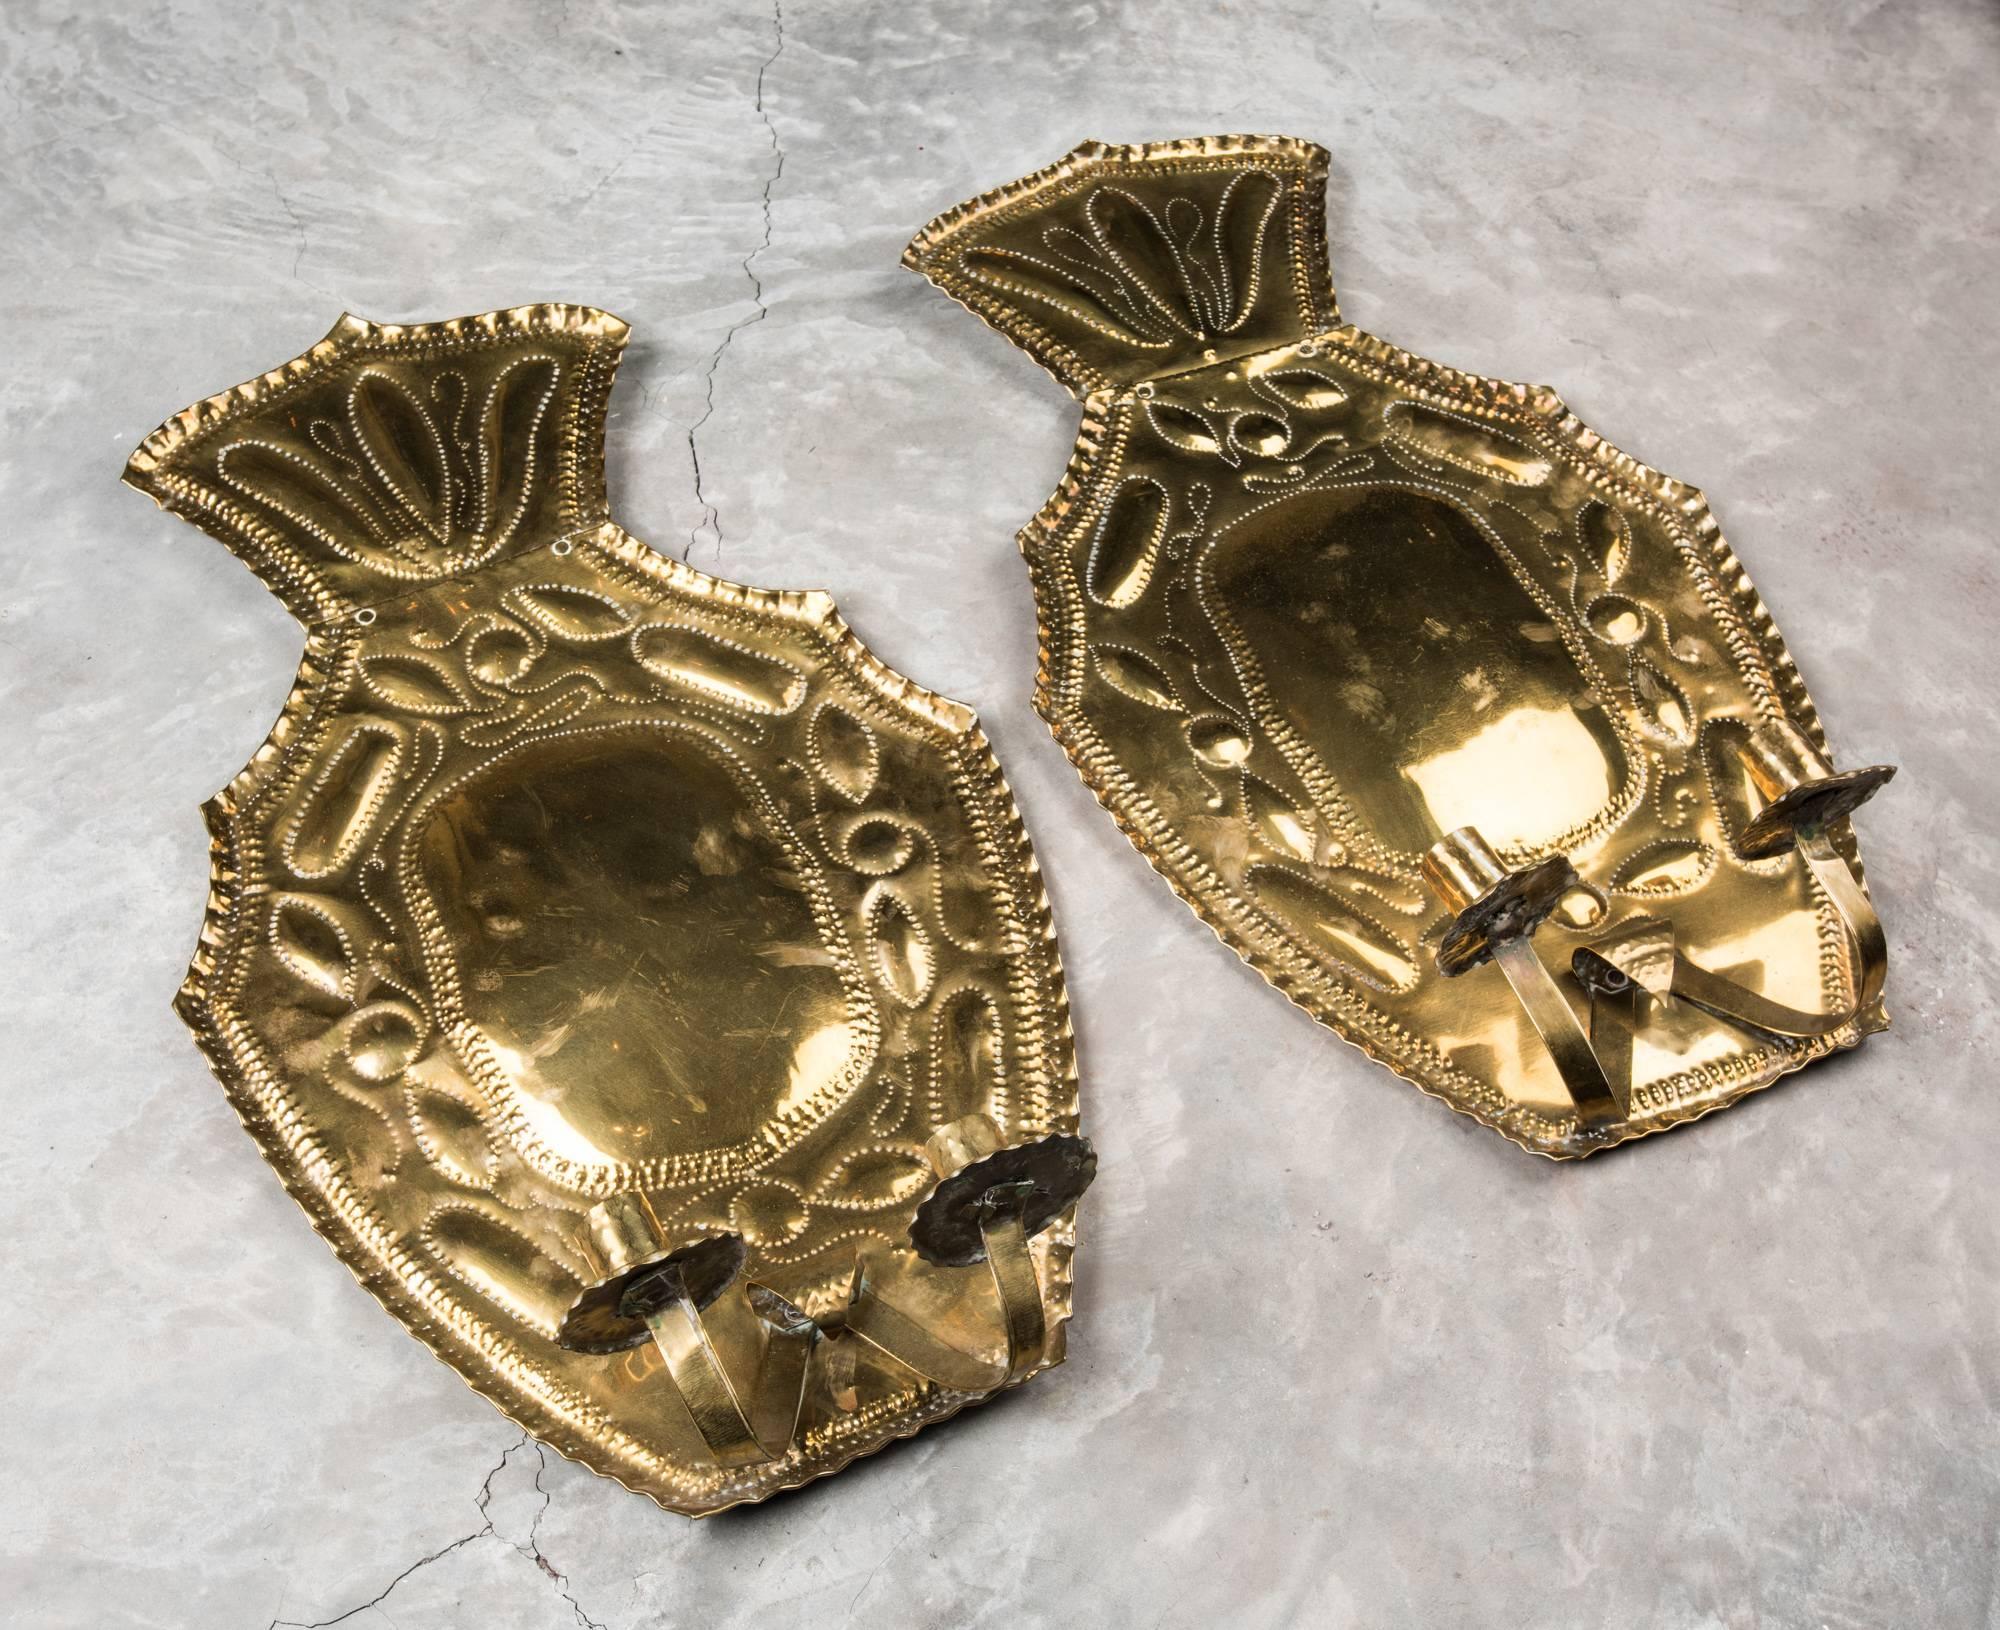 These traditional Swedish brass sconces have large brass backplates that glow with the reflected light from the lit candles. They large convex area throws golden light and the decorative patterns add special sparkles. Both sconces have two candle